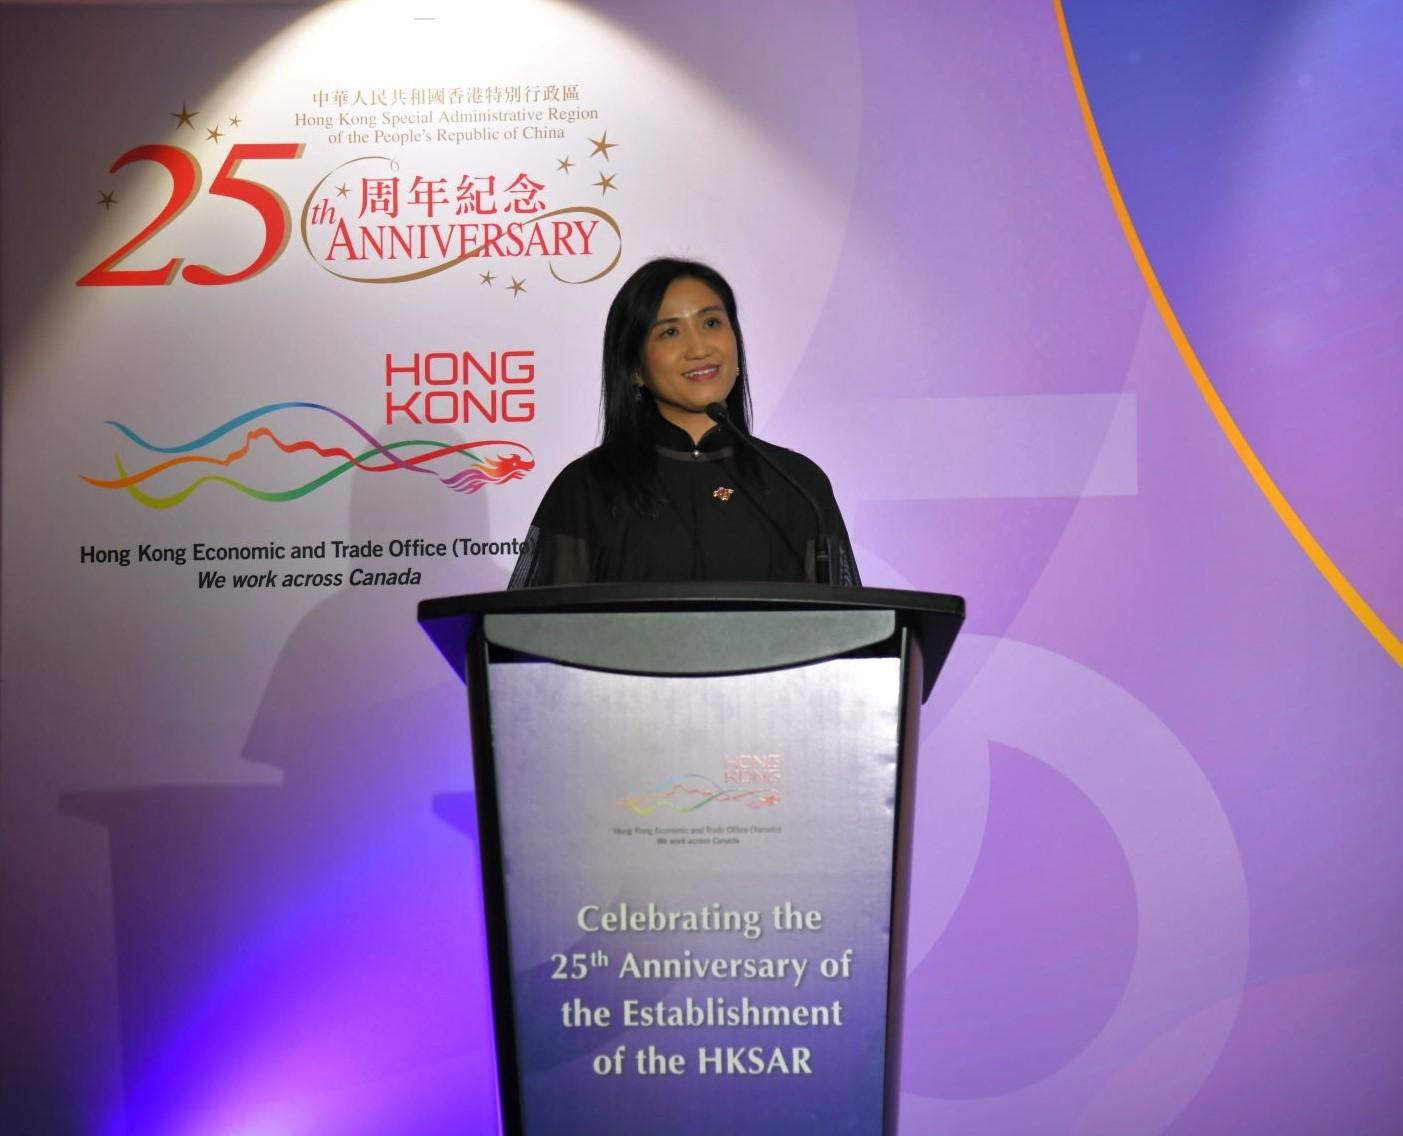 The Director of the Hong Kong Economic and Trade Office (Toronto), Ms Emily Mo, delivers the welcome remarks at the official gala dinner in celebration of the 25th anniversary of the establishment of the Hong Kong Special Administrative Region in Toronto, Canada, yesterday (June 28, Toronto time).